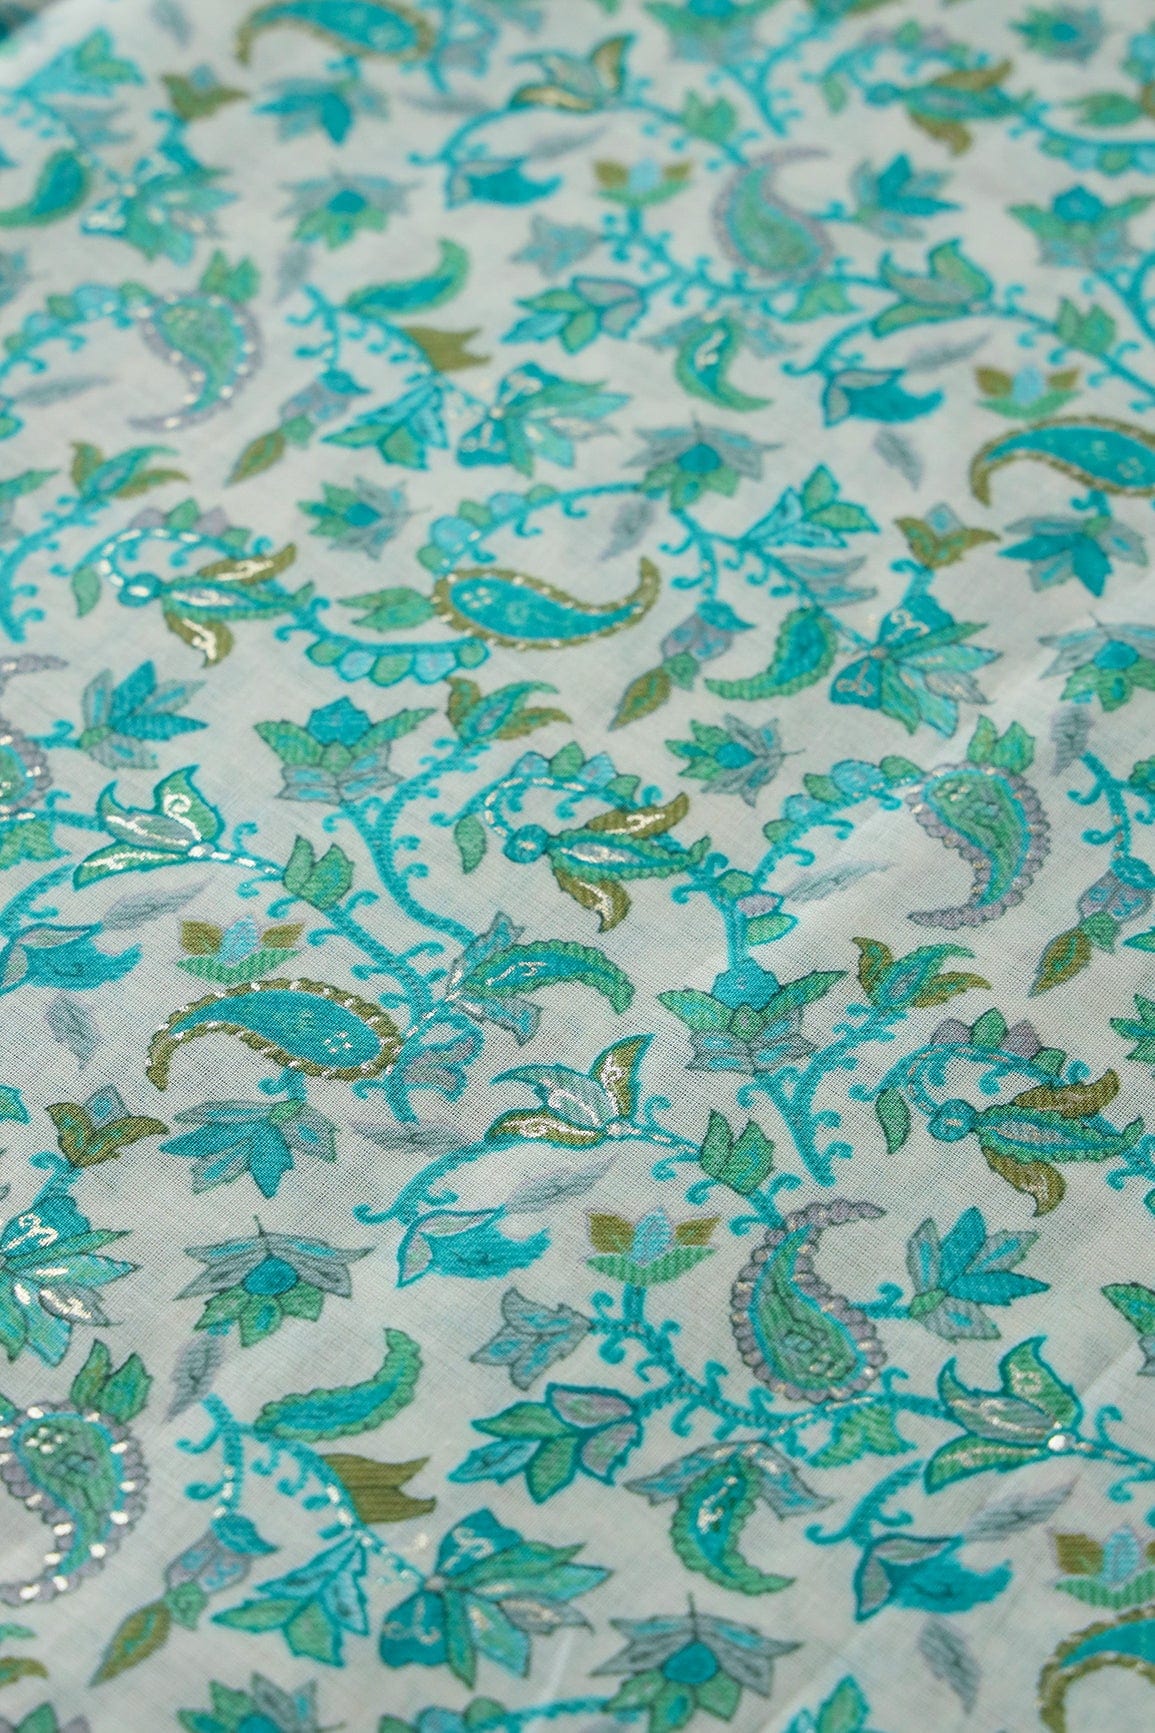 doeraa Prints Turquoise And White Paisley Foil Print On Pure Mul Cotton Fabric